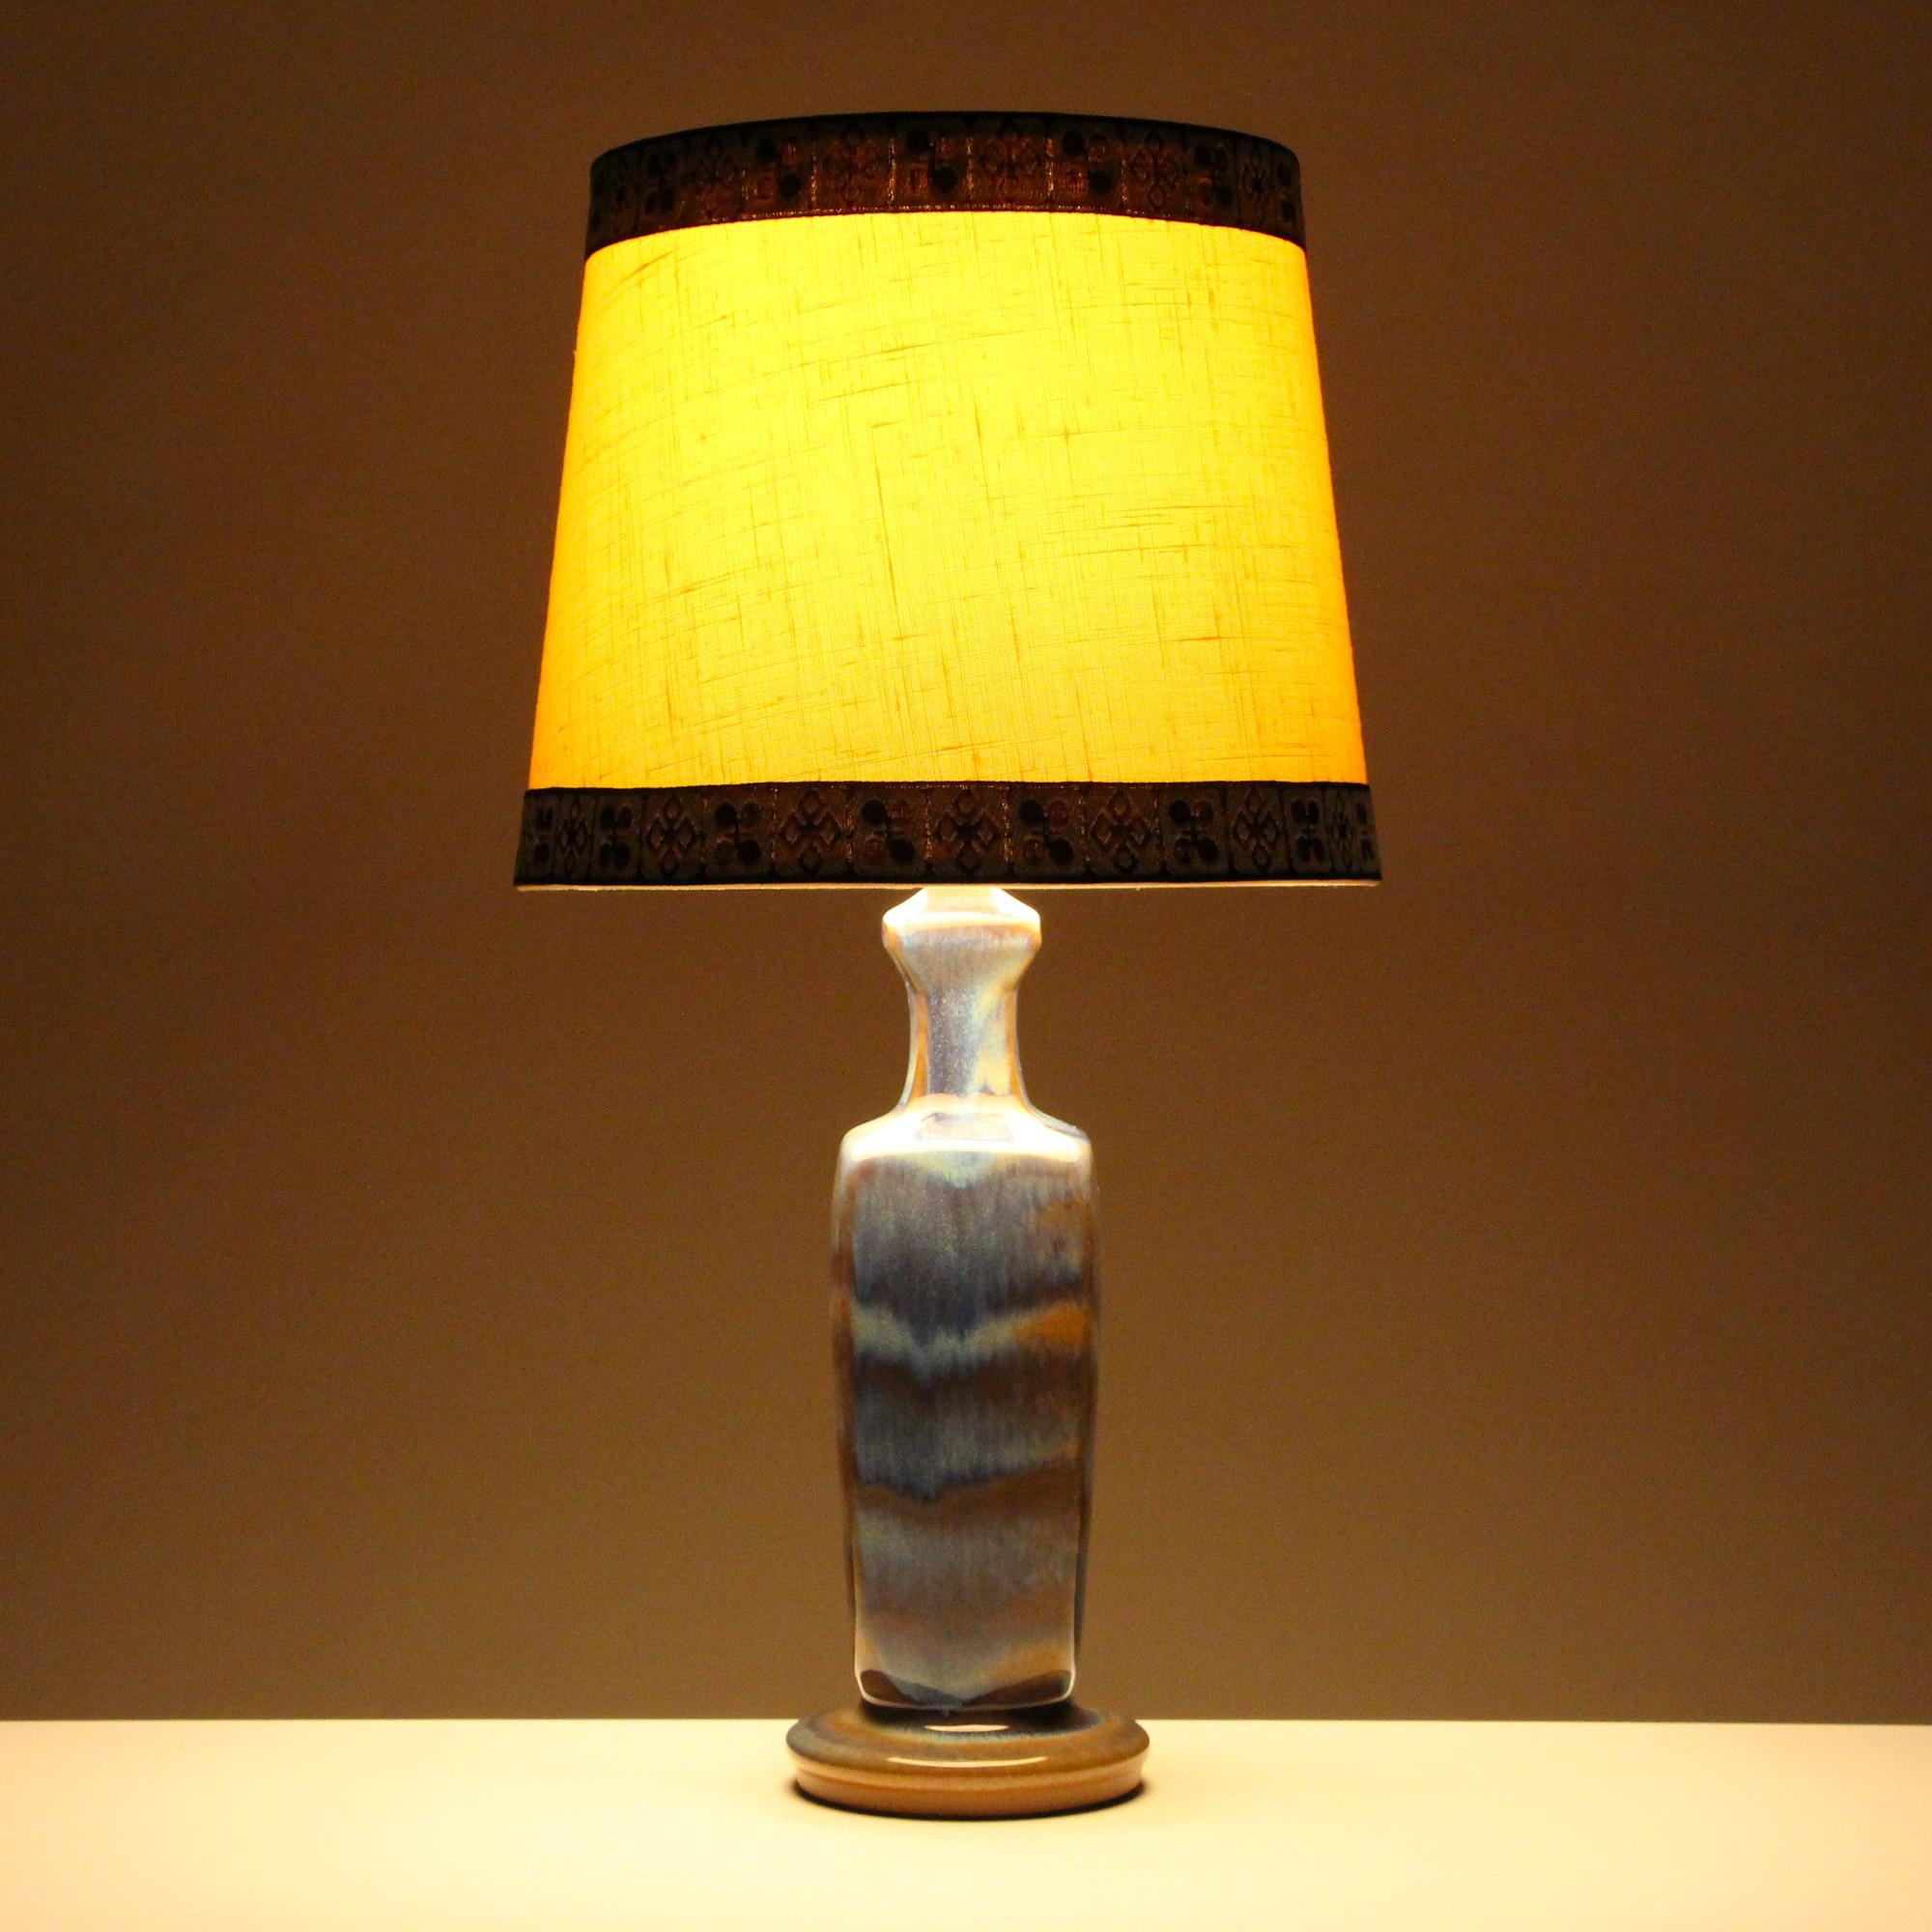 Blue table lamp, no. 5549 by Michael Andersen & Son in the 1960s, Danish blue ceramic lamp stand with vintage beige fabric shade included, all in excellent vintage condition.

A beautiful table light with an ancient Greek inspired expression, the